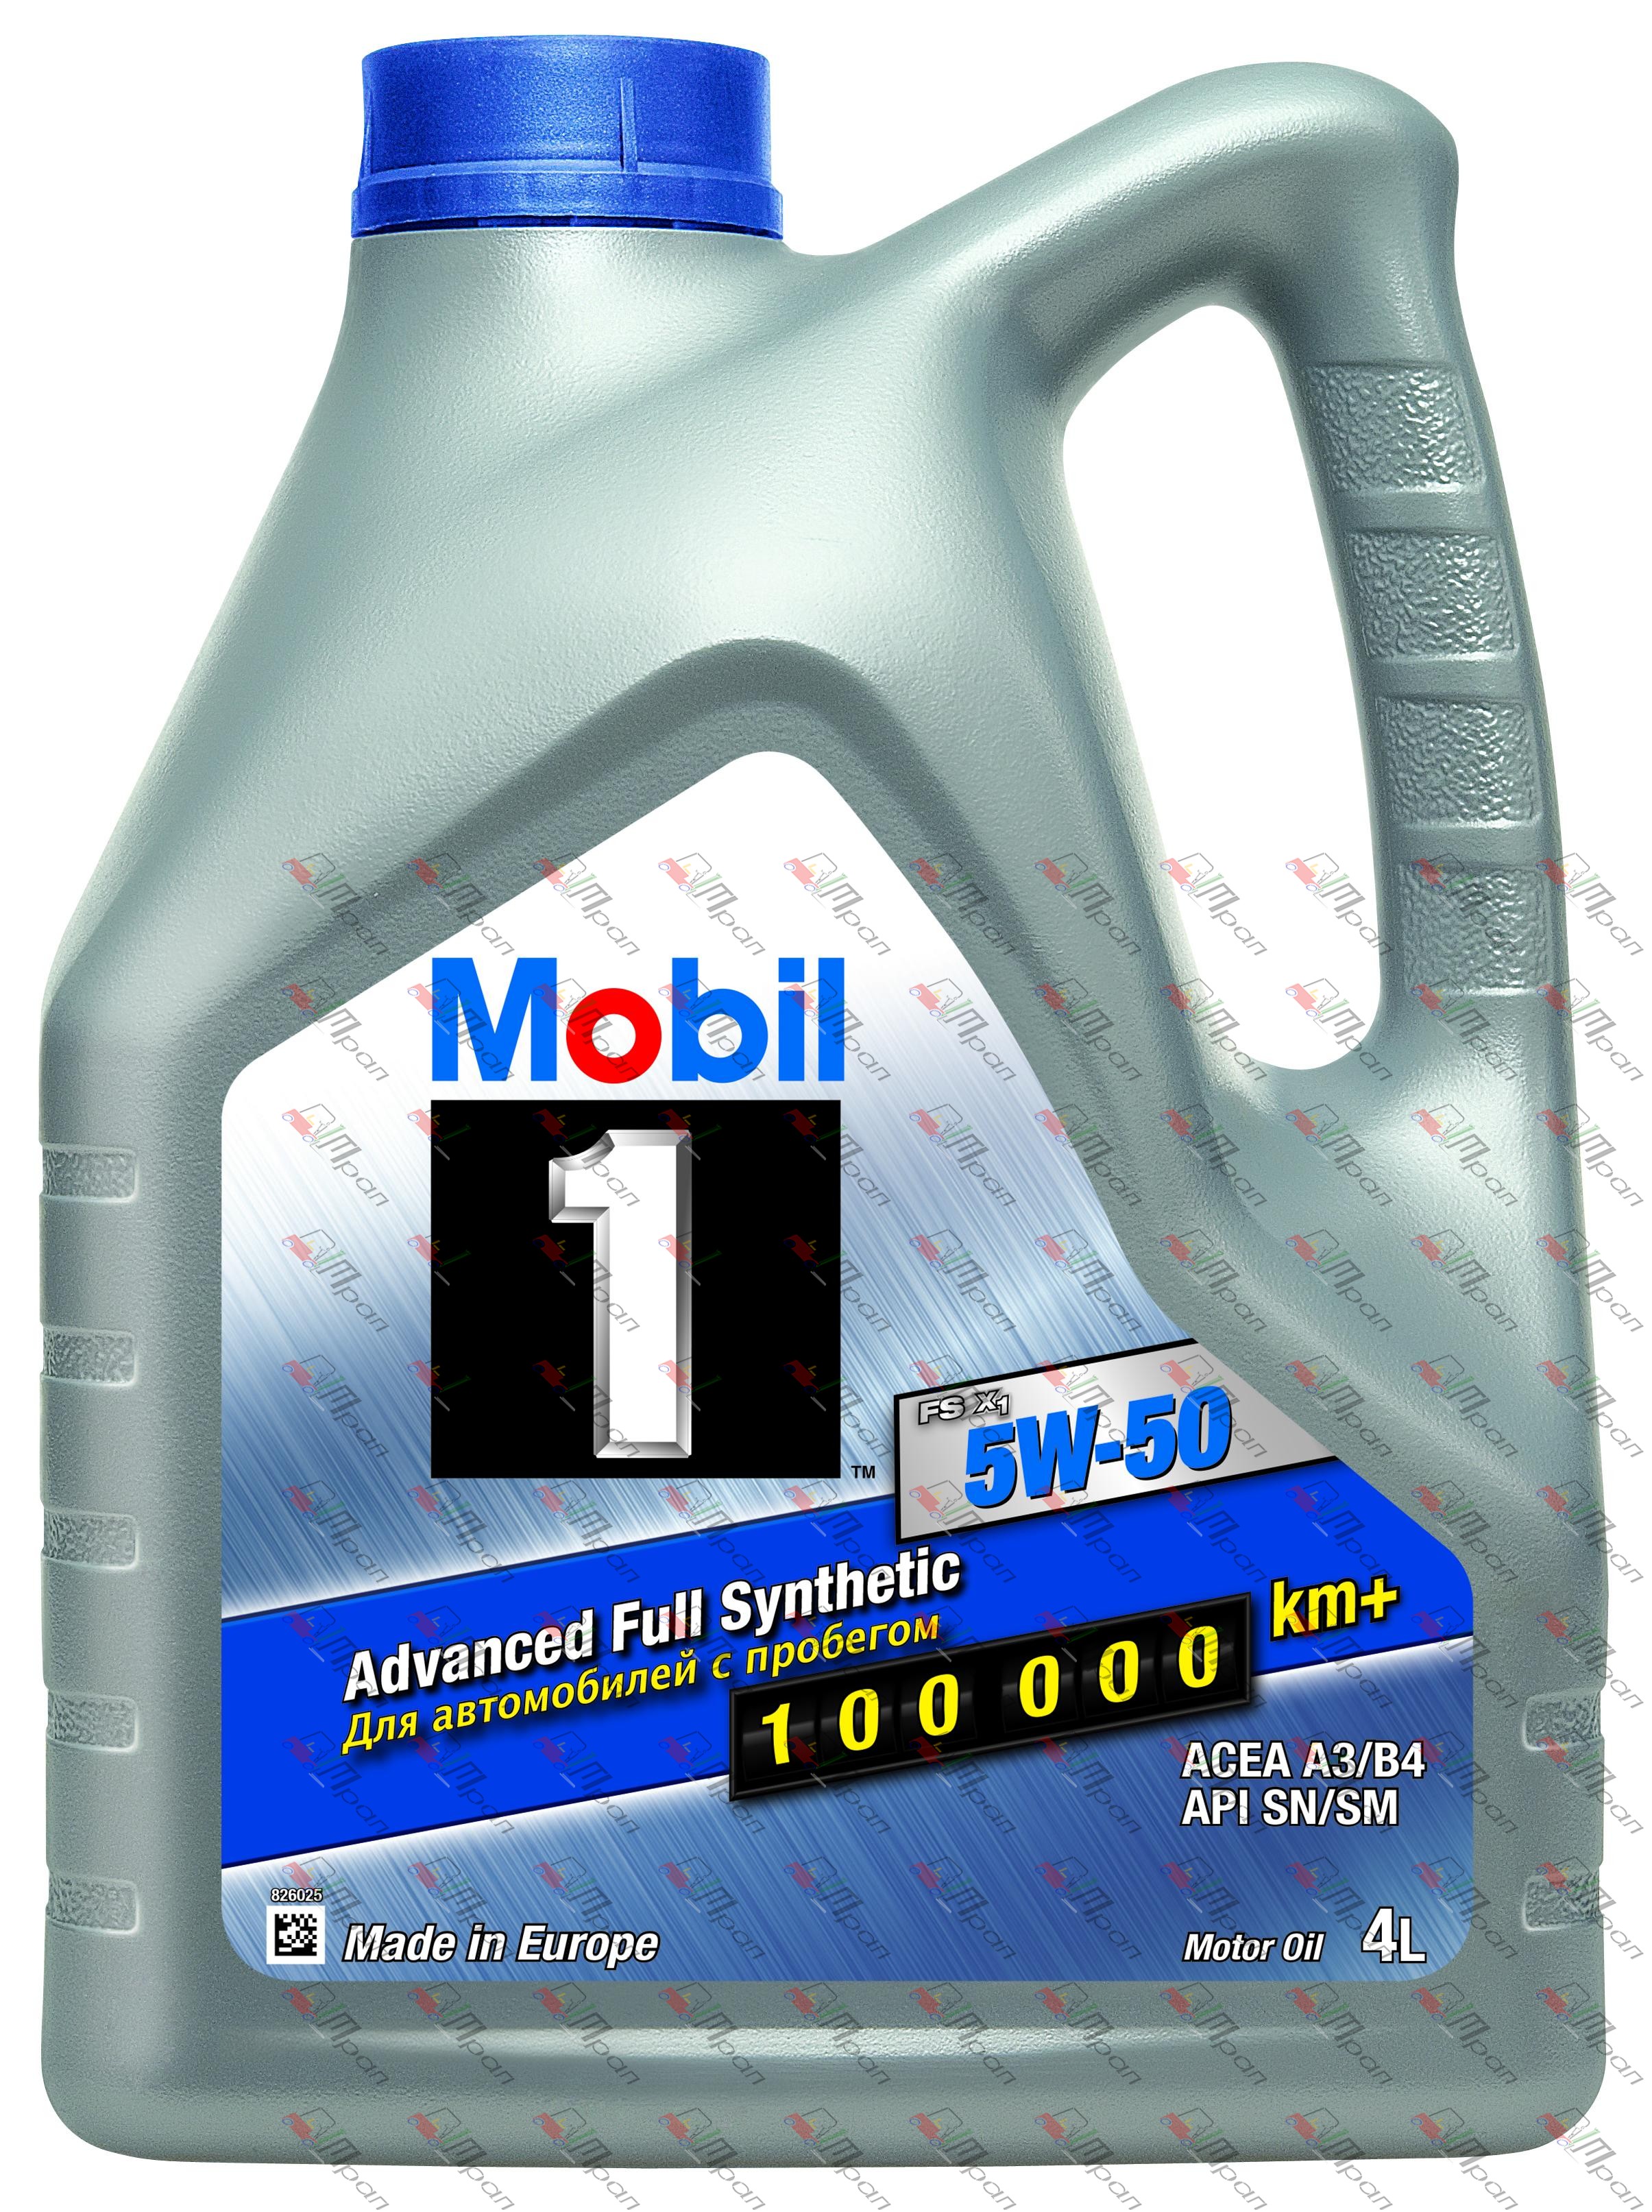 Mobil Масло моторное синтетич. Mobil 1 FS X1 5w50 4л